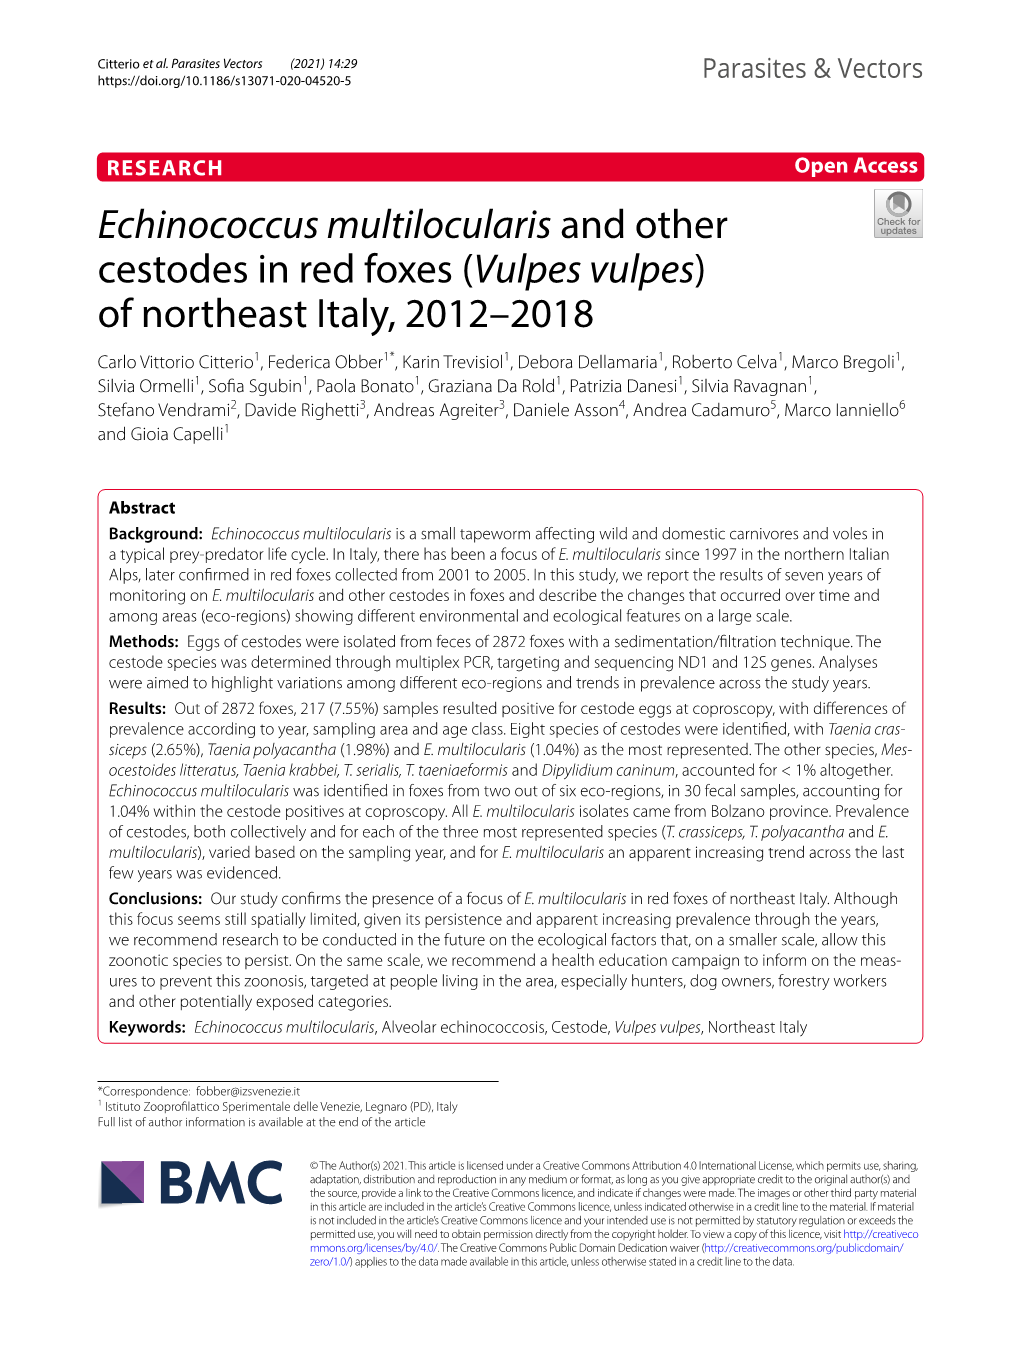 Echinococcus Multilocularis and Other Cestodes in Red Foxes